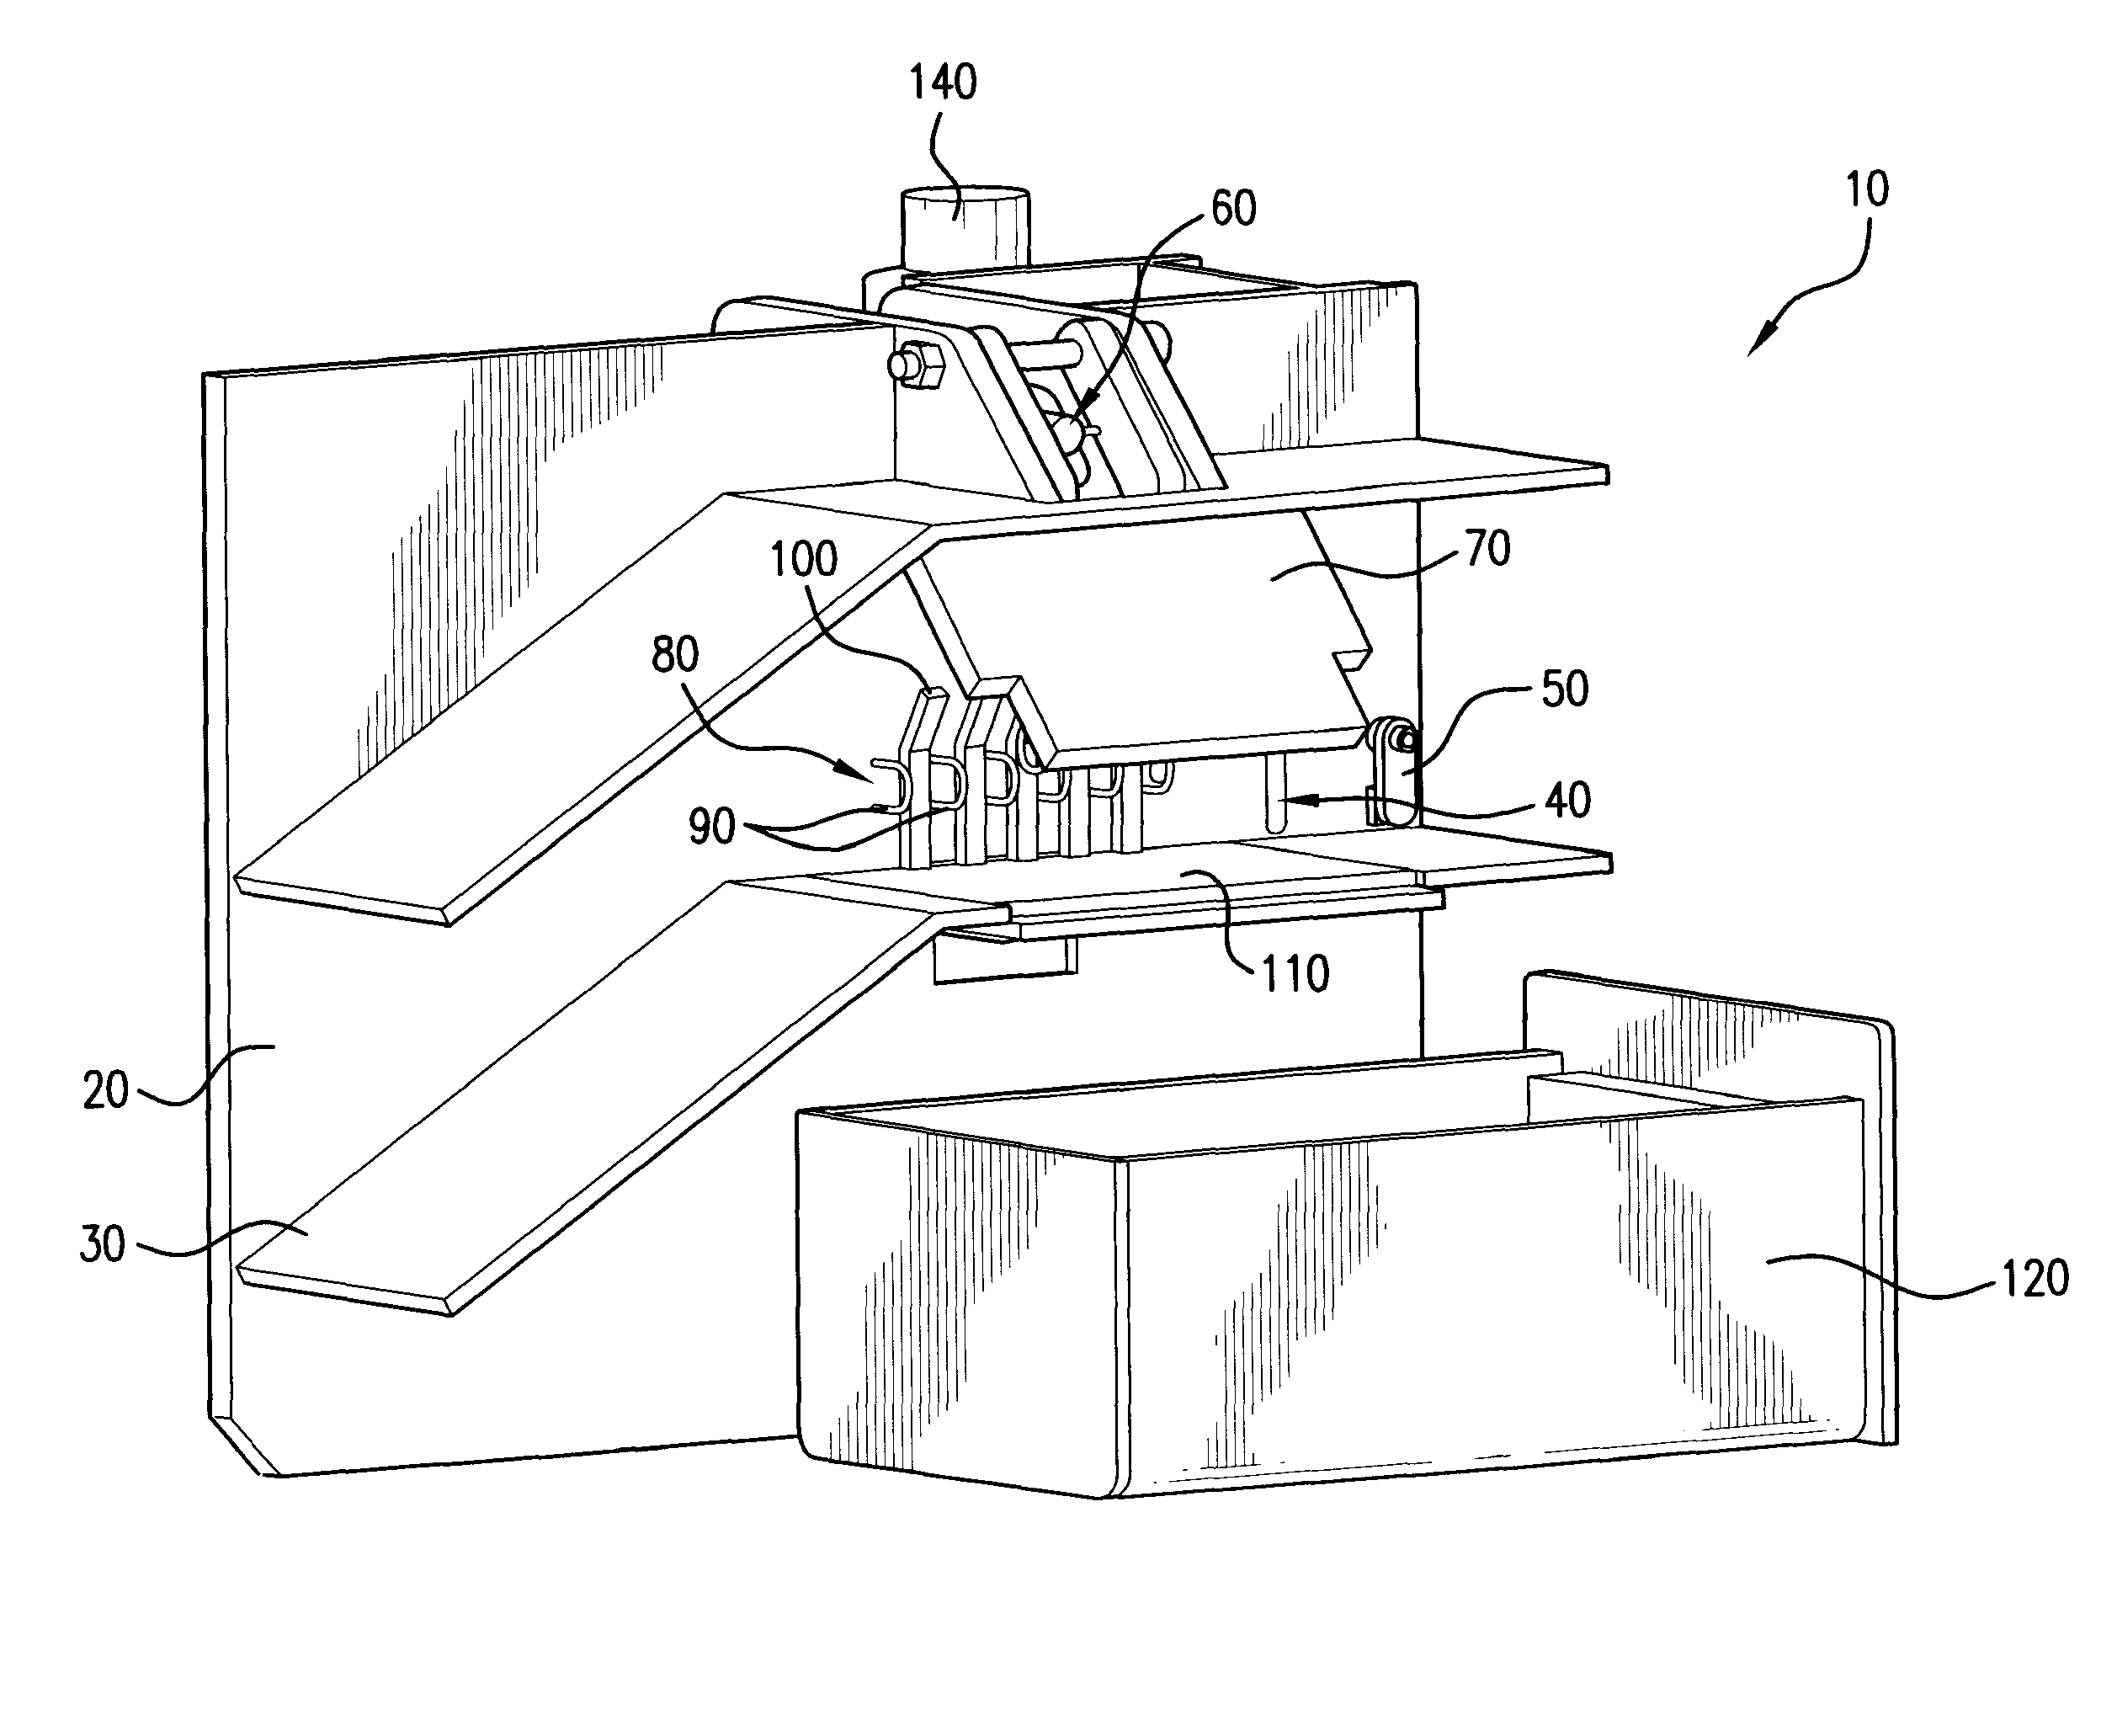 Multiple-use vermin electrocution trap and method